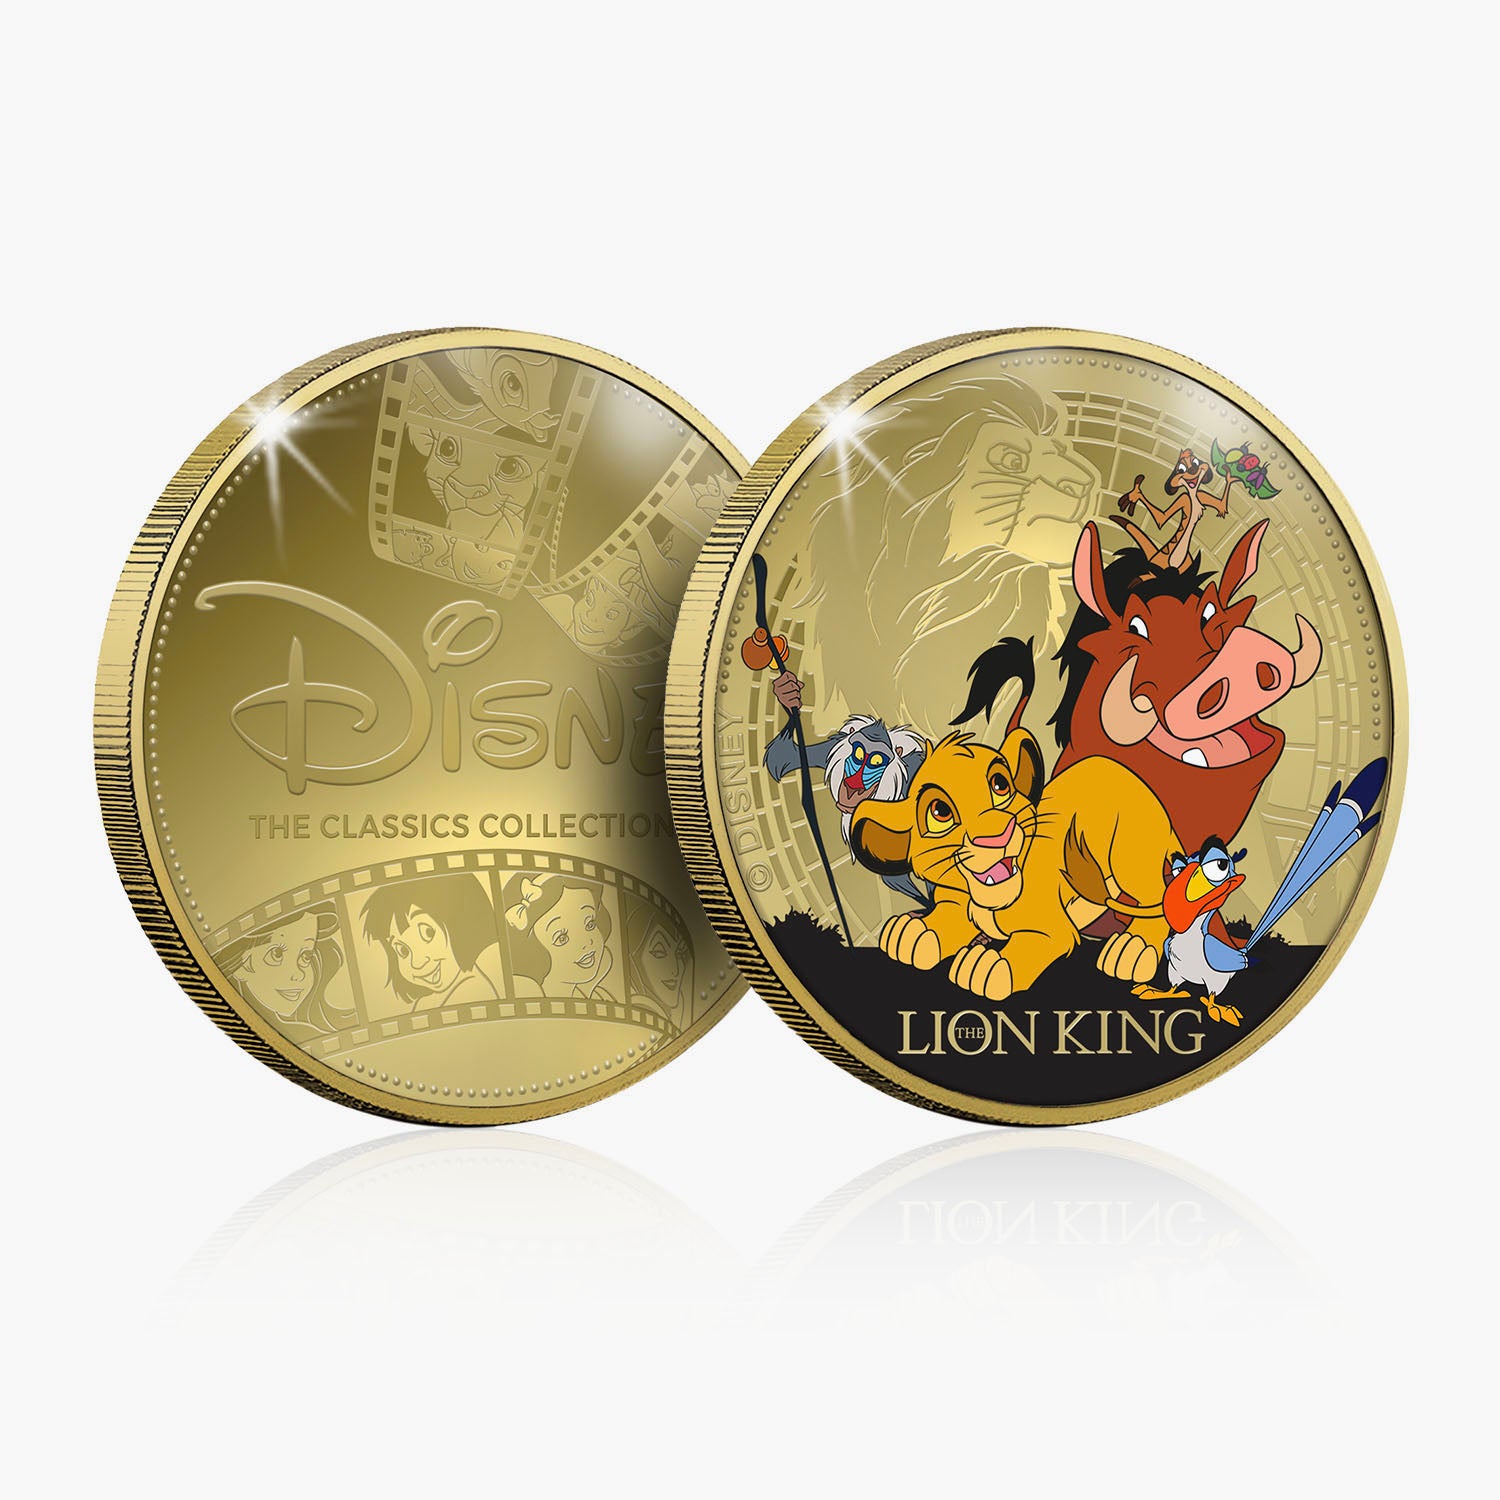 The Lion King Gold-Plated Commemorative